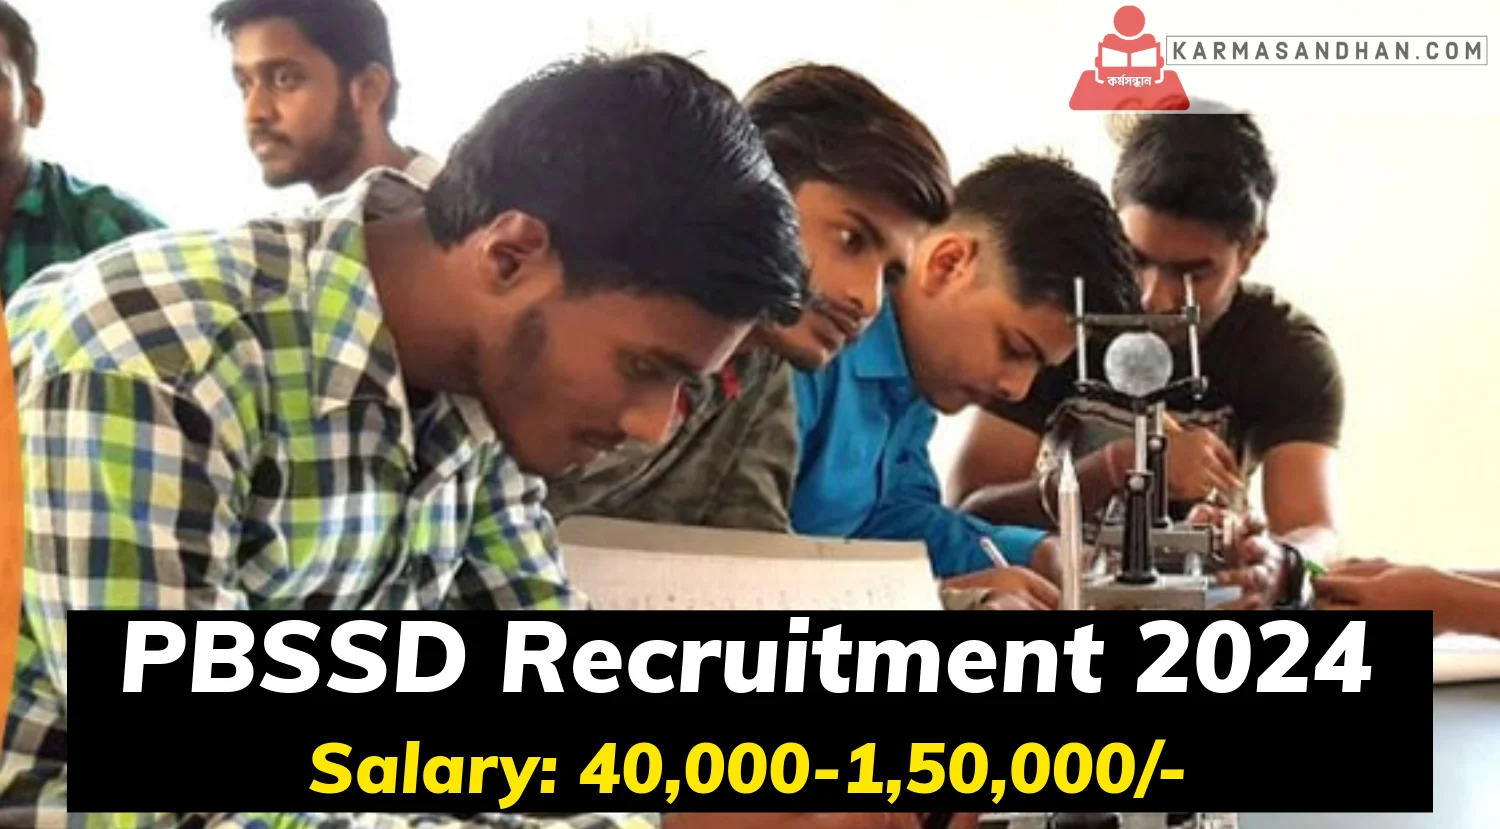 PBSSD Recruitment 2024 Notification Out, Check Details